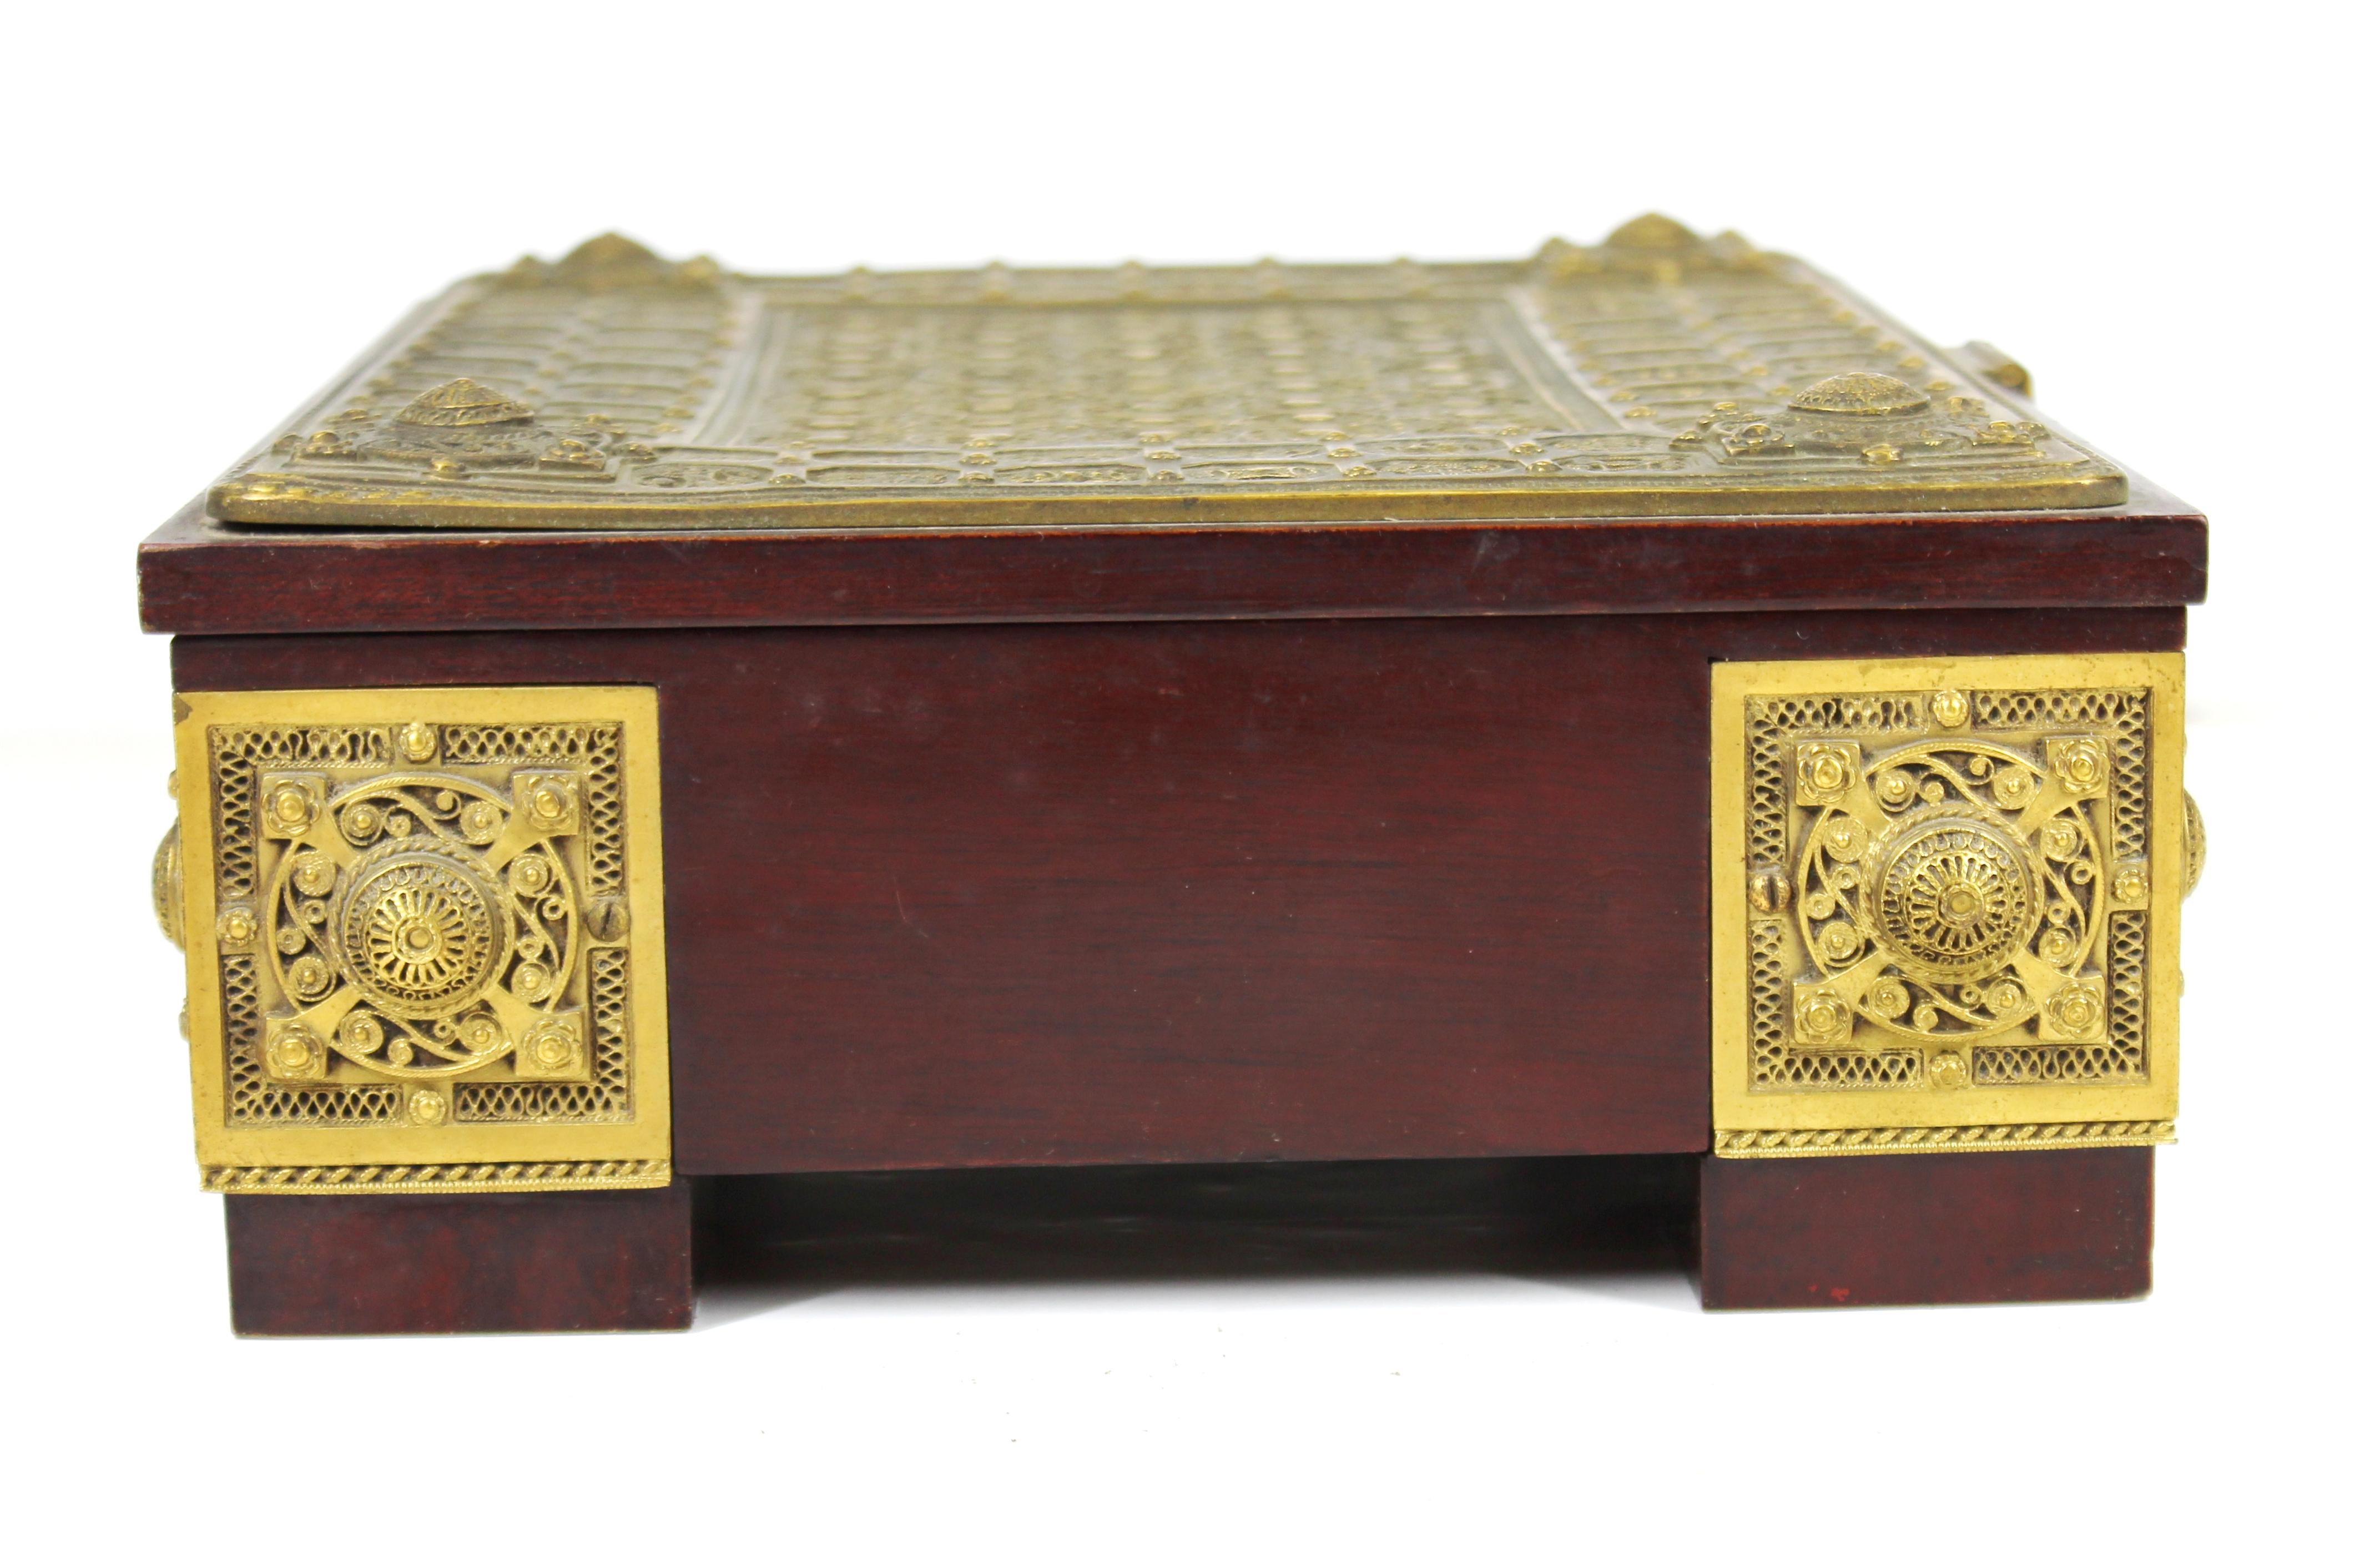 Early 20th Century Erhard & Söhne German Secessionist Humidor or Casket Box In Gilt Brass Filigree